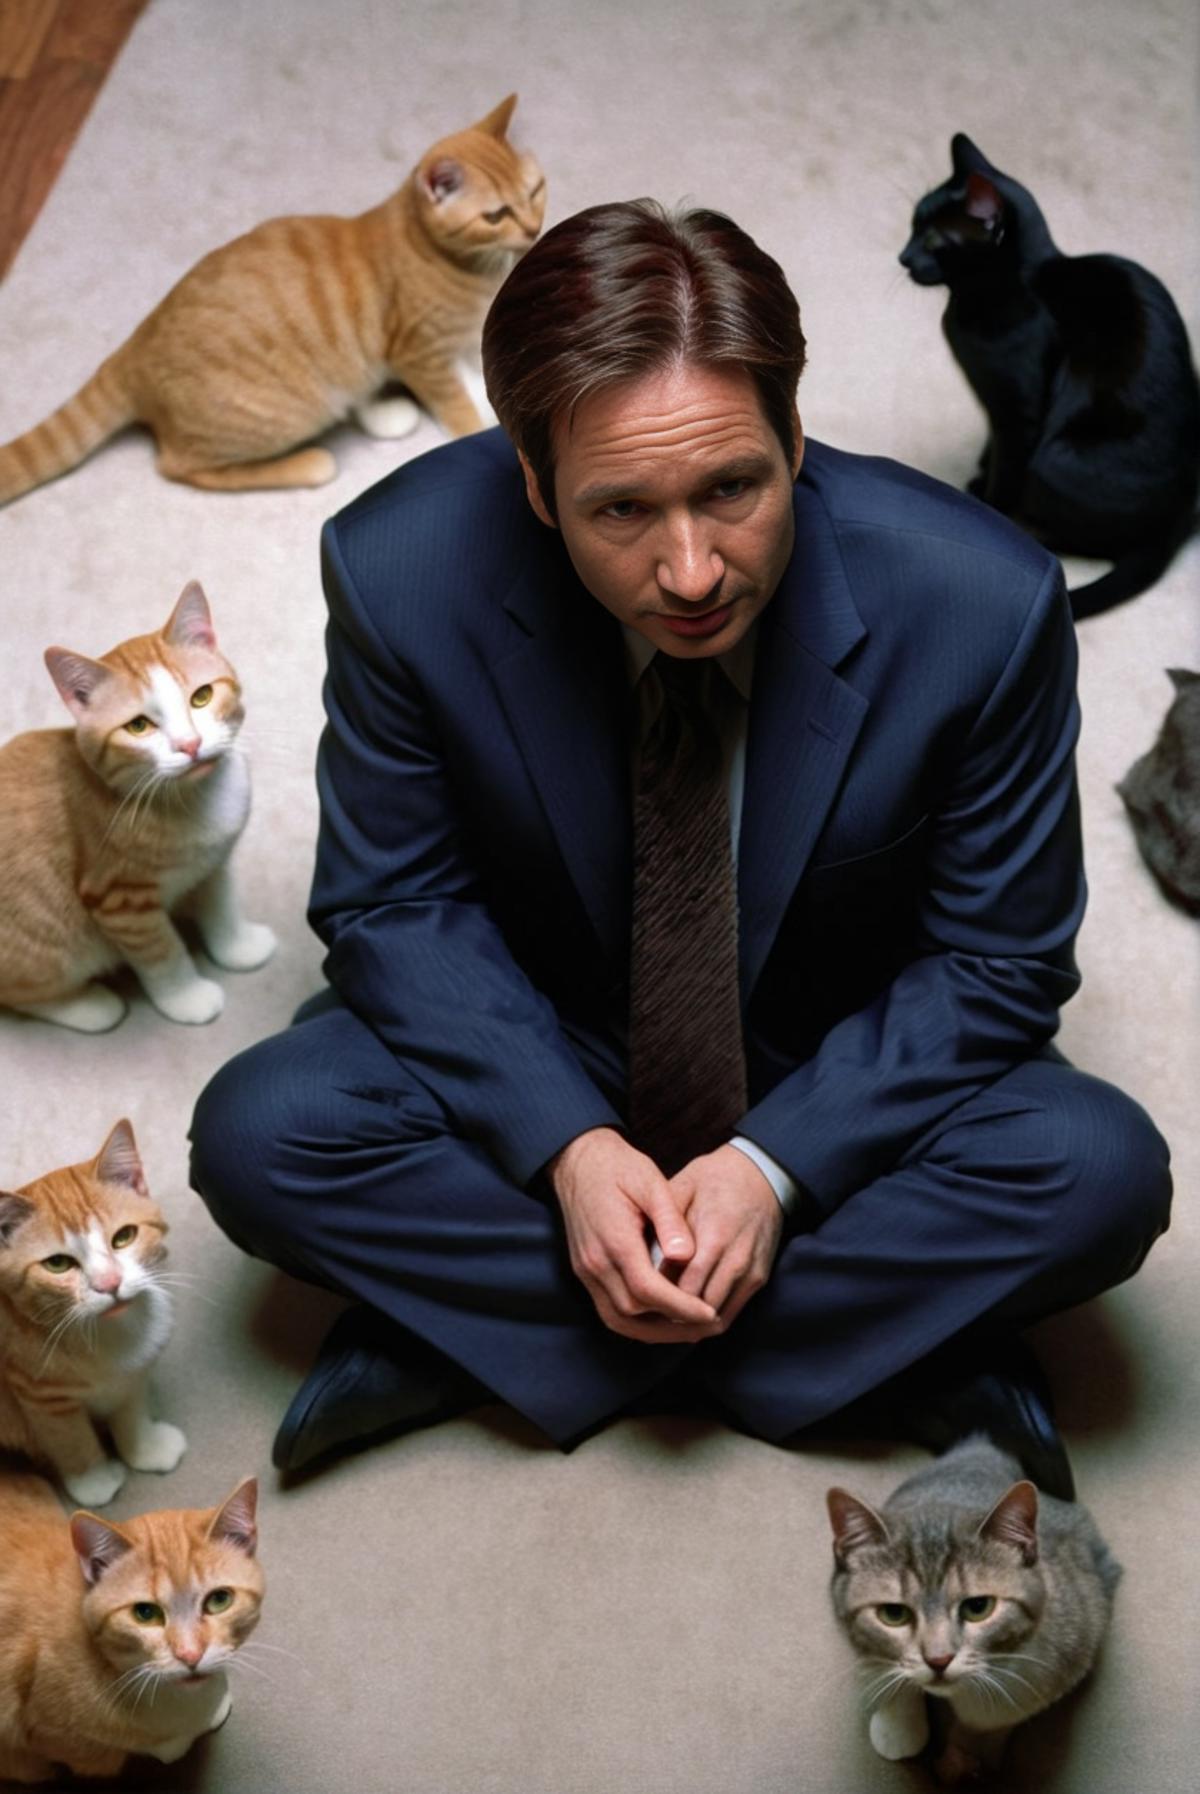 A man in a suit sits on the floor with multiple cats surrounding him.